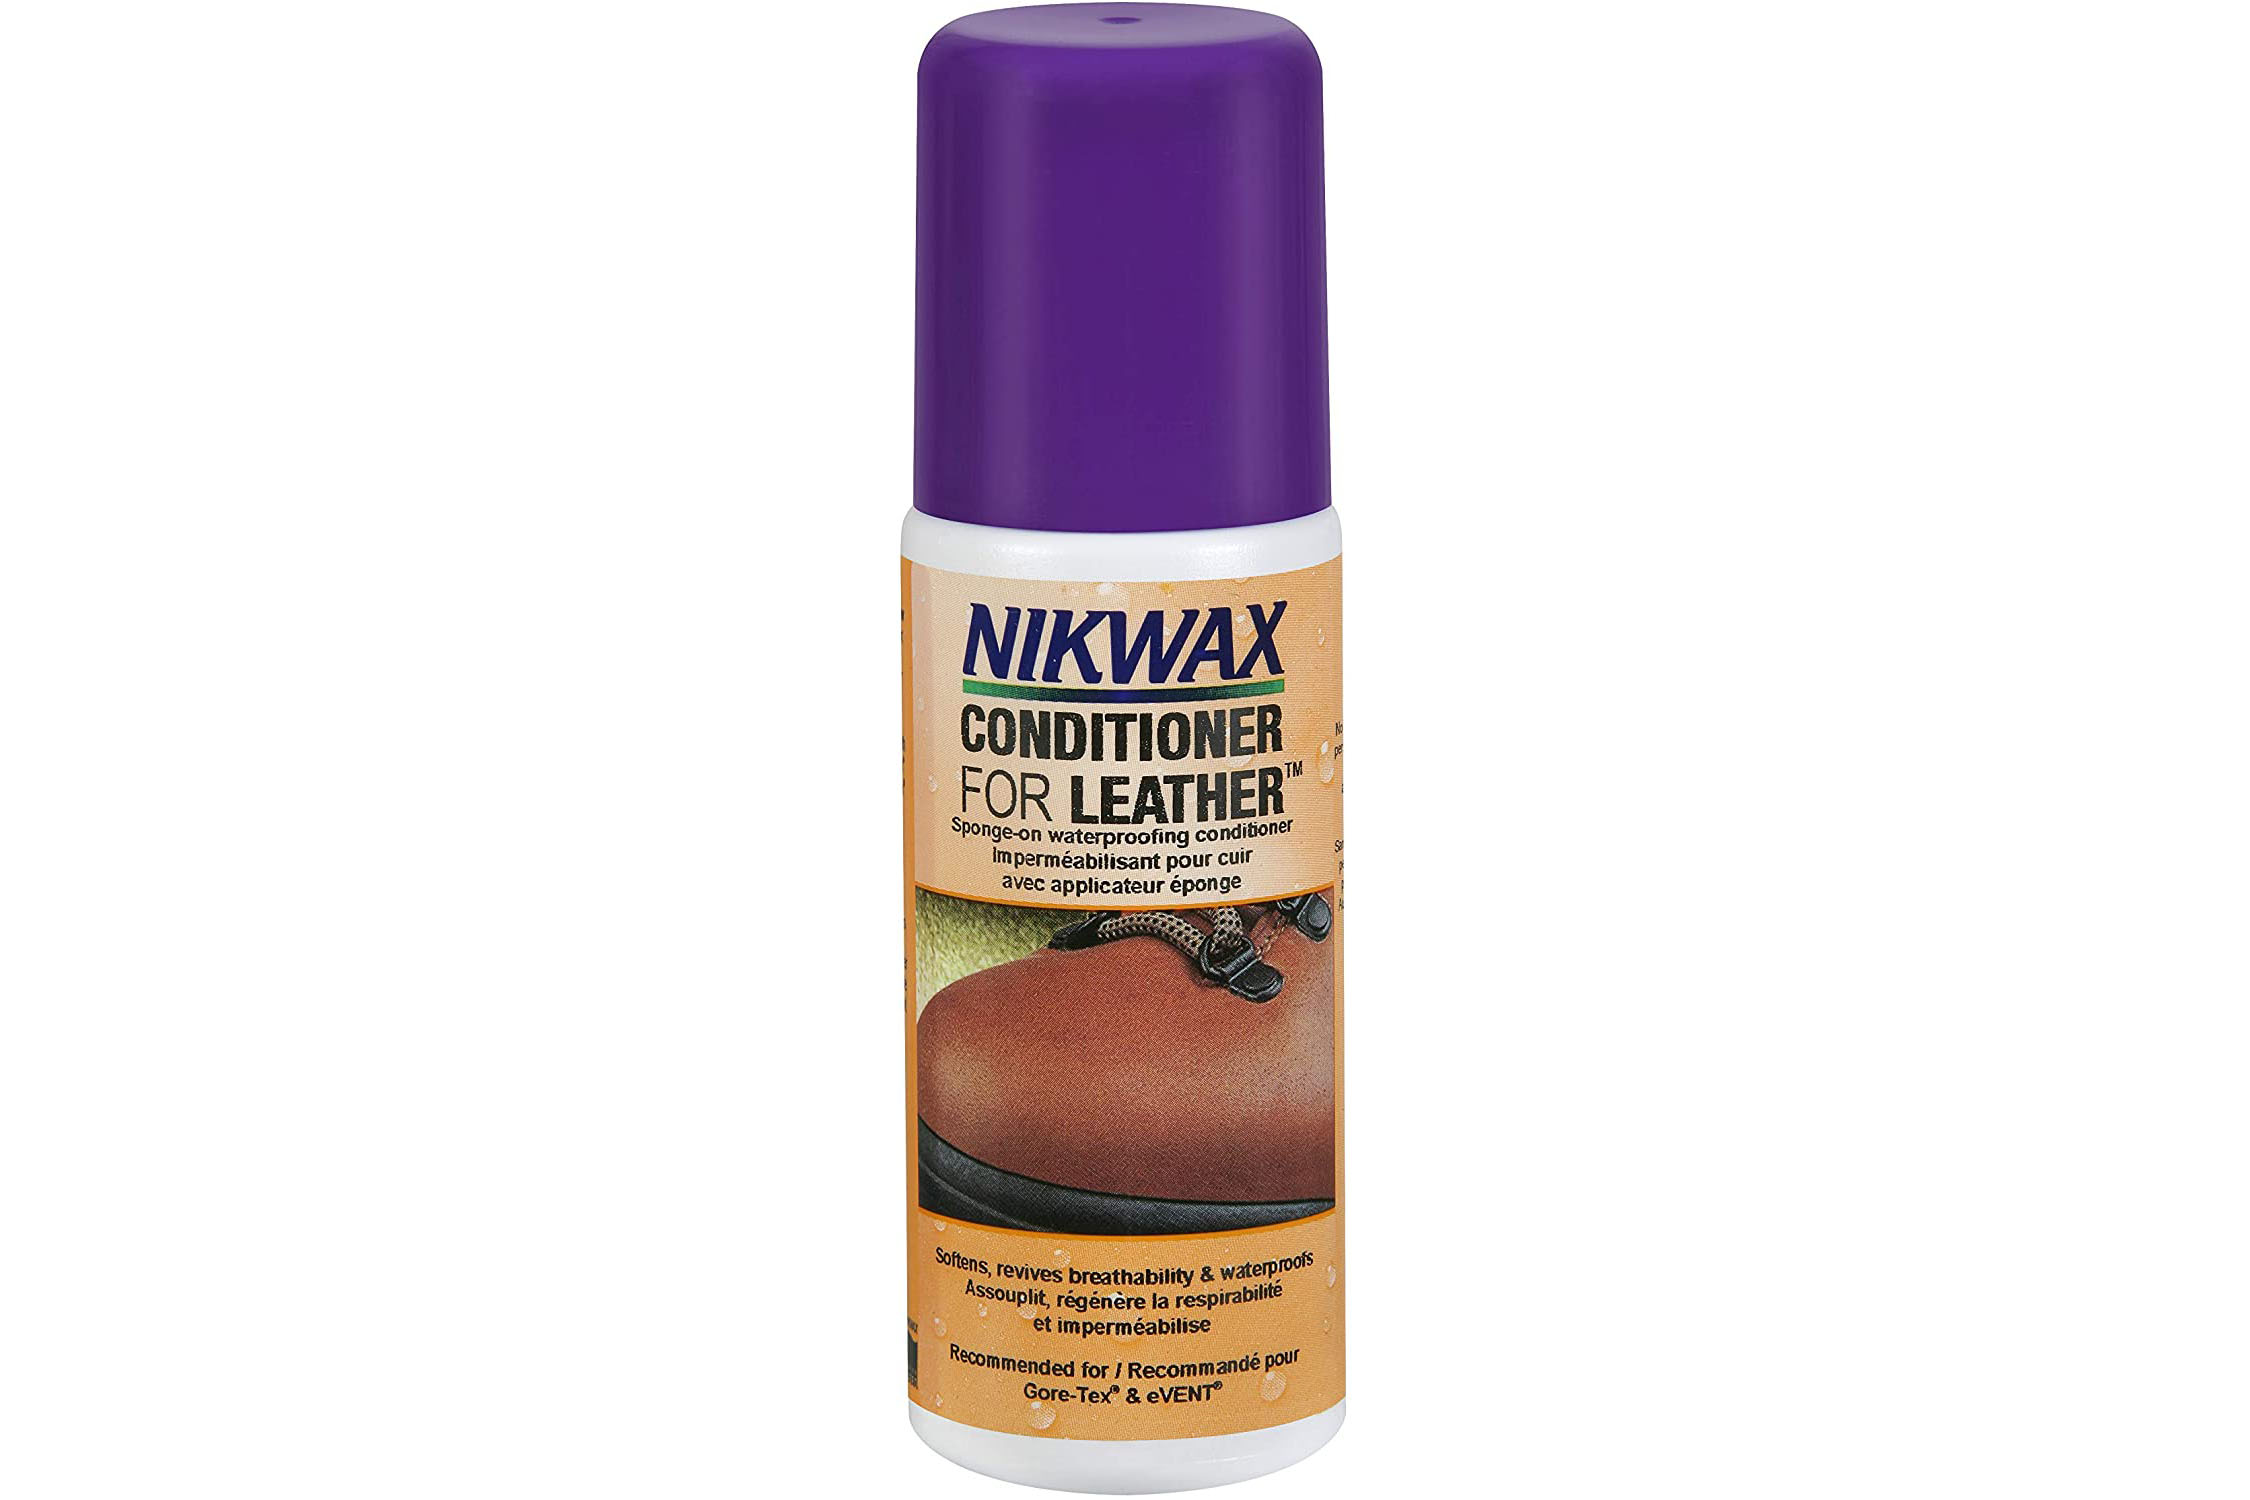 Use NikWax Conditioner to help break in boots and keep them soft and conditioned over time.